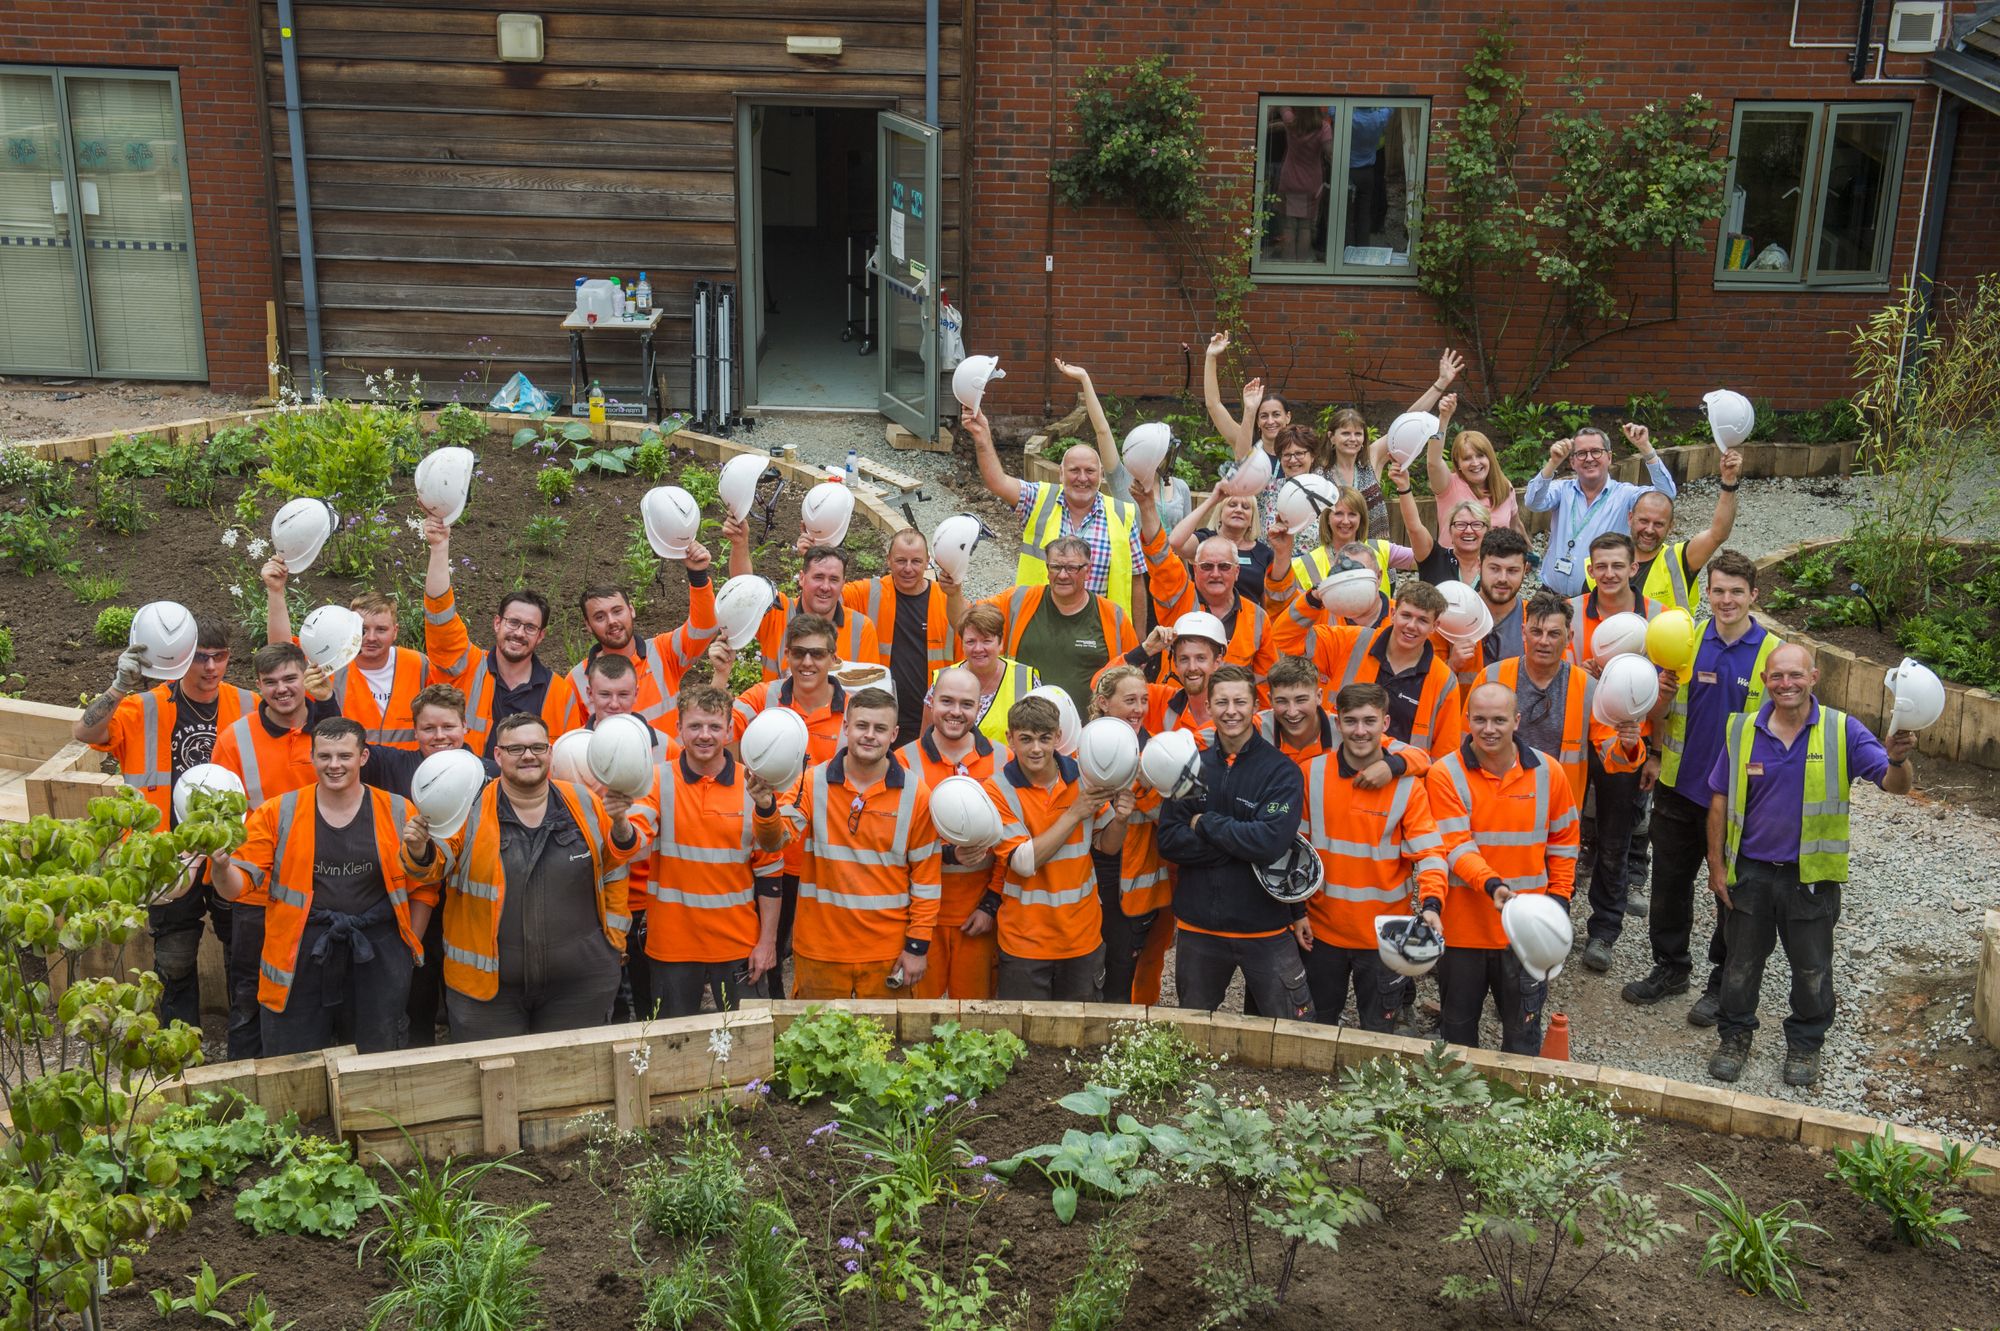 All workers waving at camera from garden